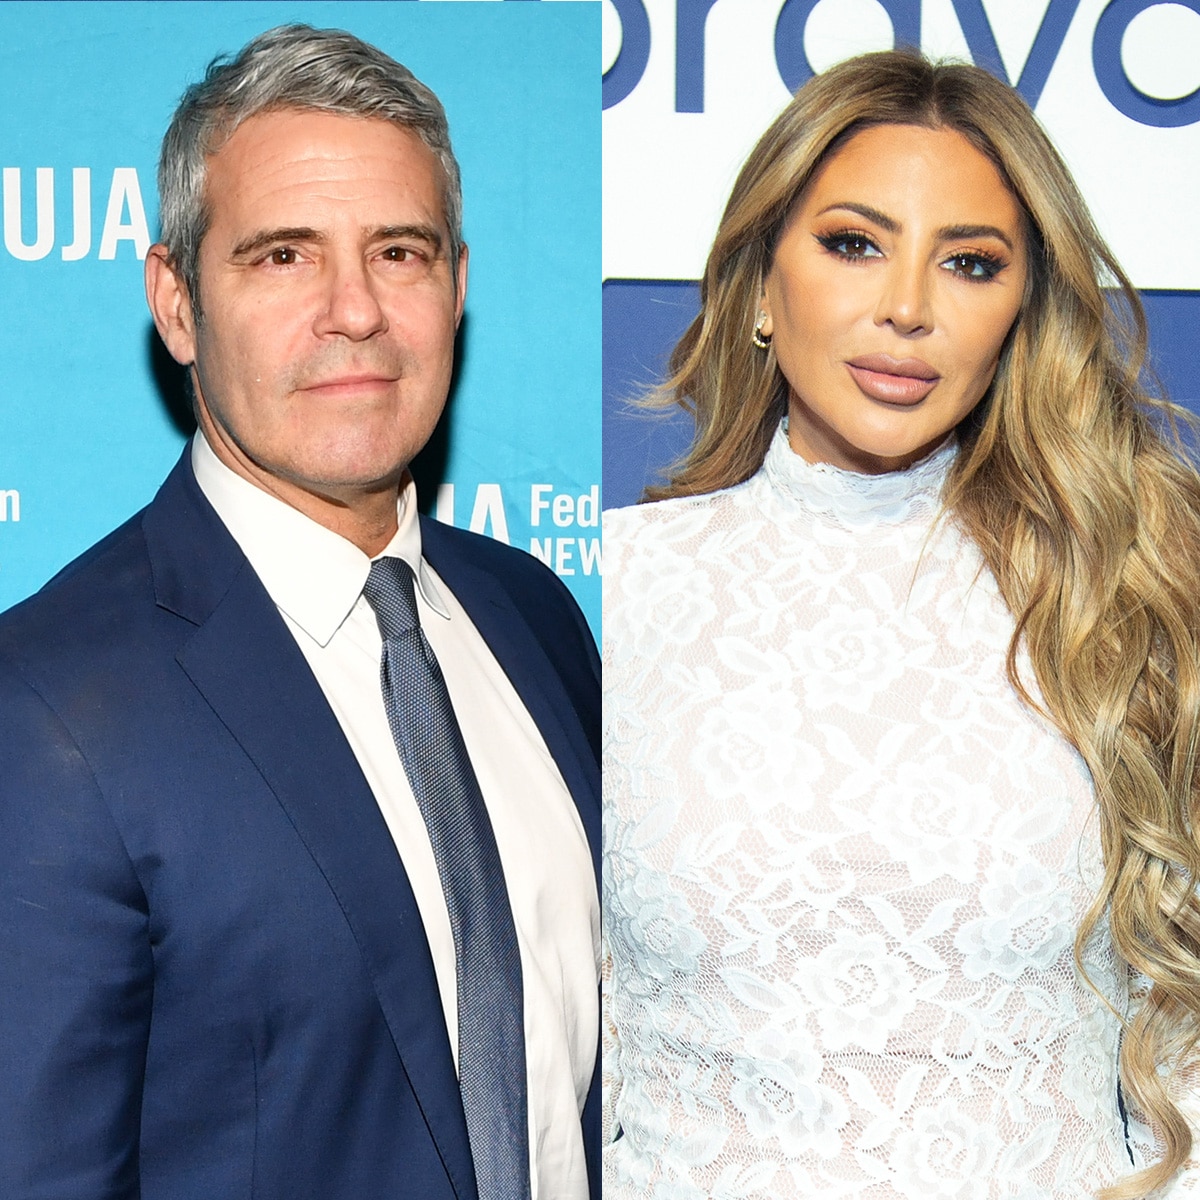 Andy Cohen Apologizes for Screaming at RHOMs Larsa Pippen